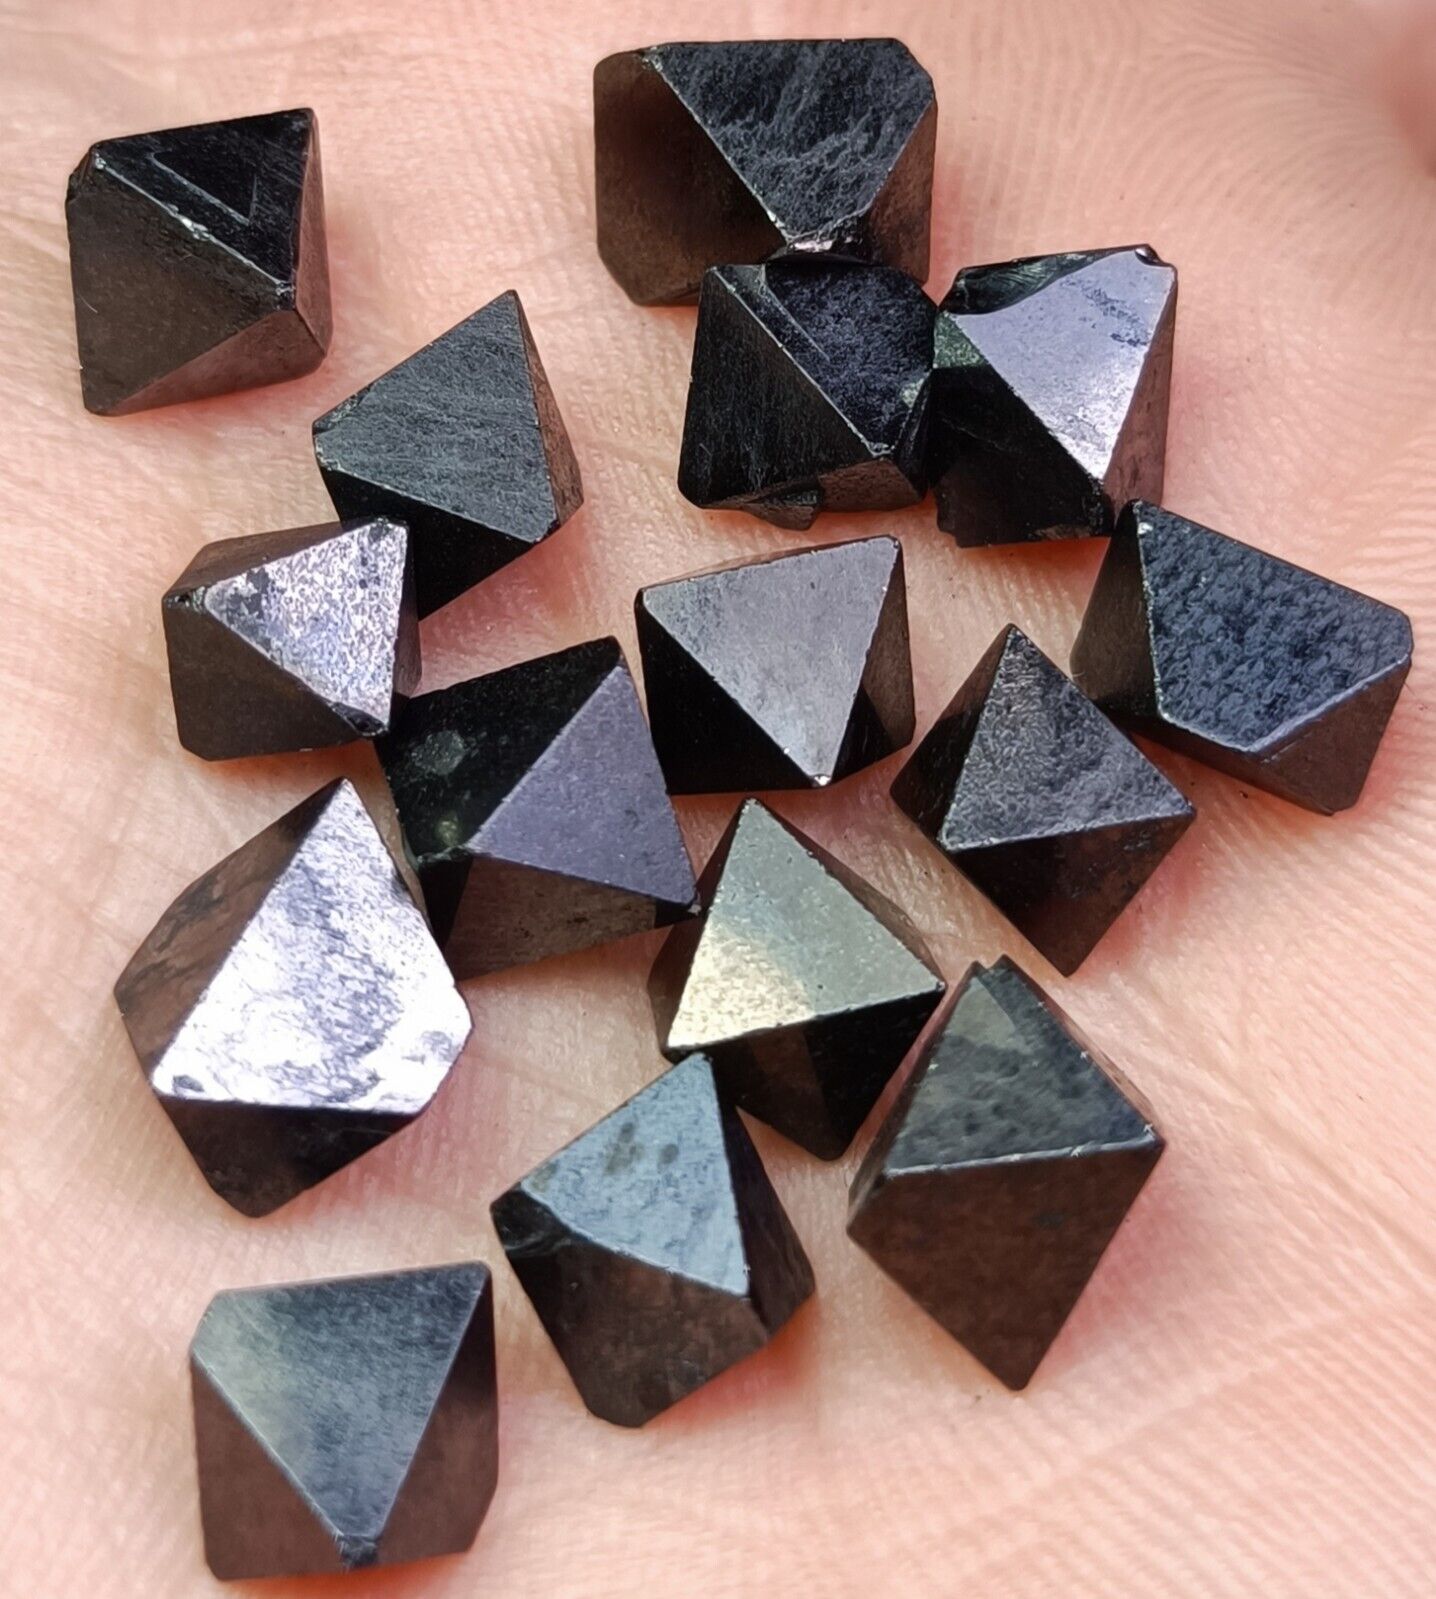 Rare Octahedron Magnetite Crystals with good luster and terminations-(17g)